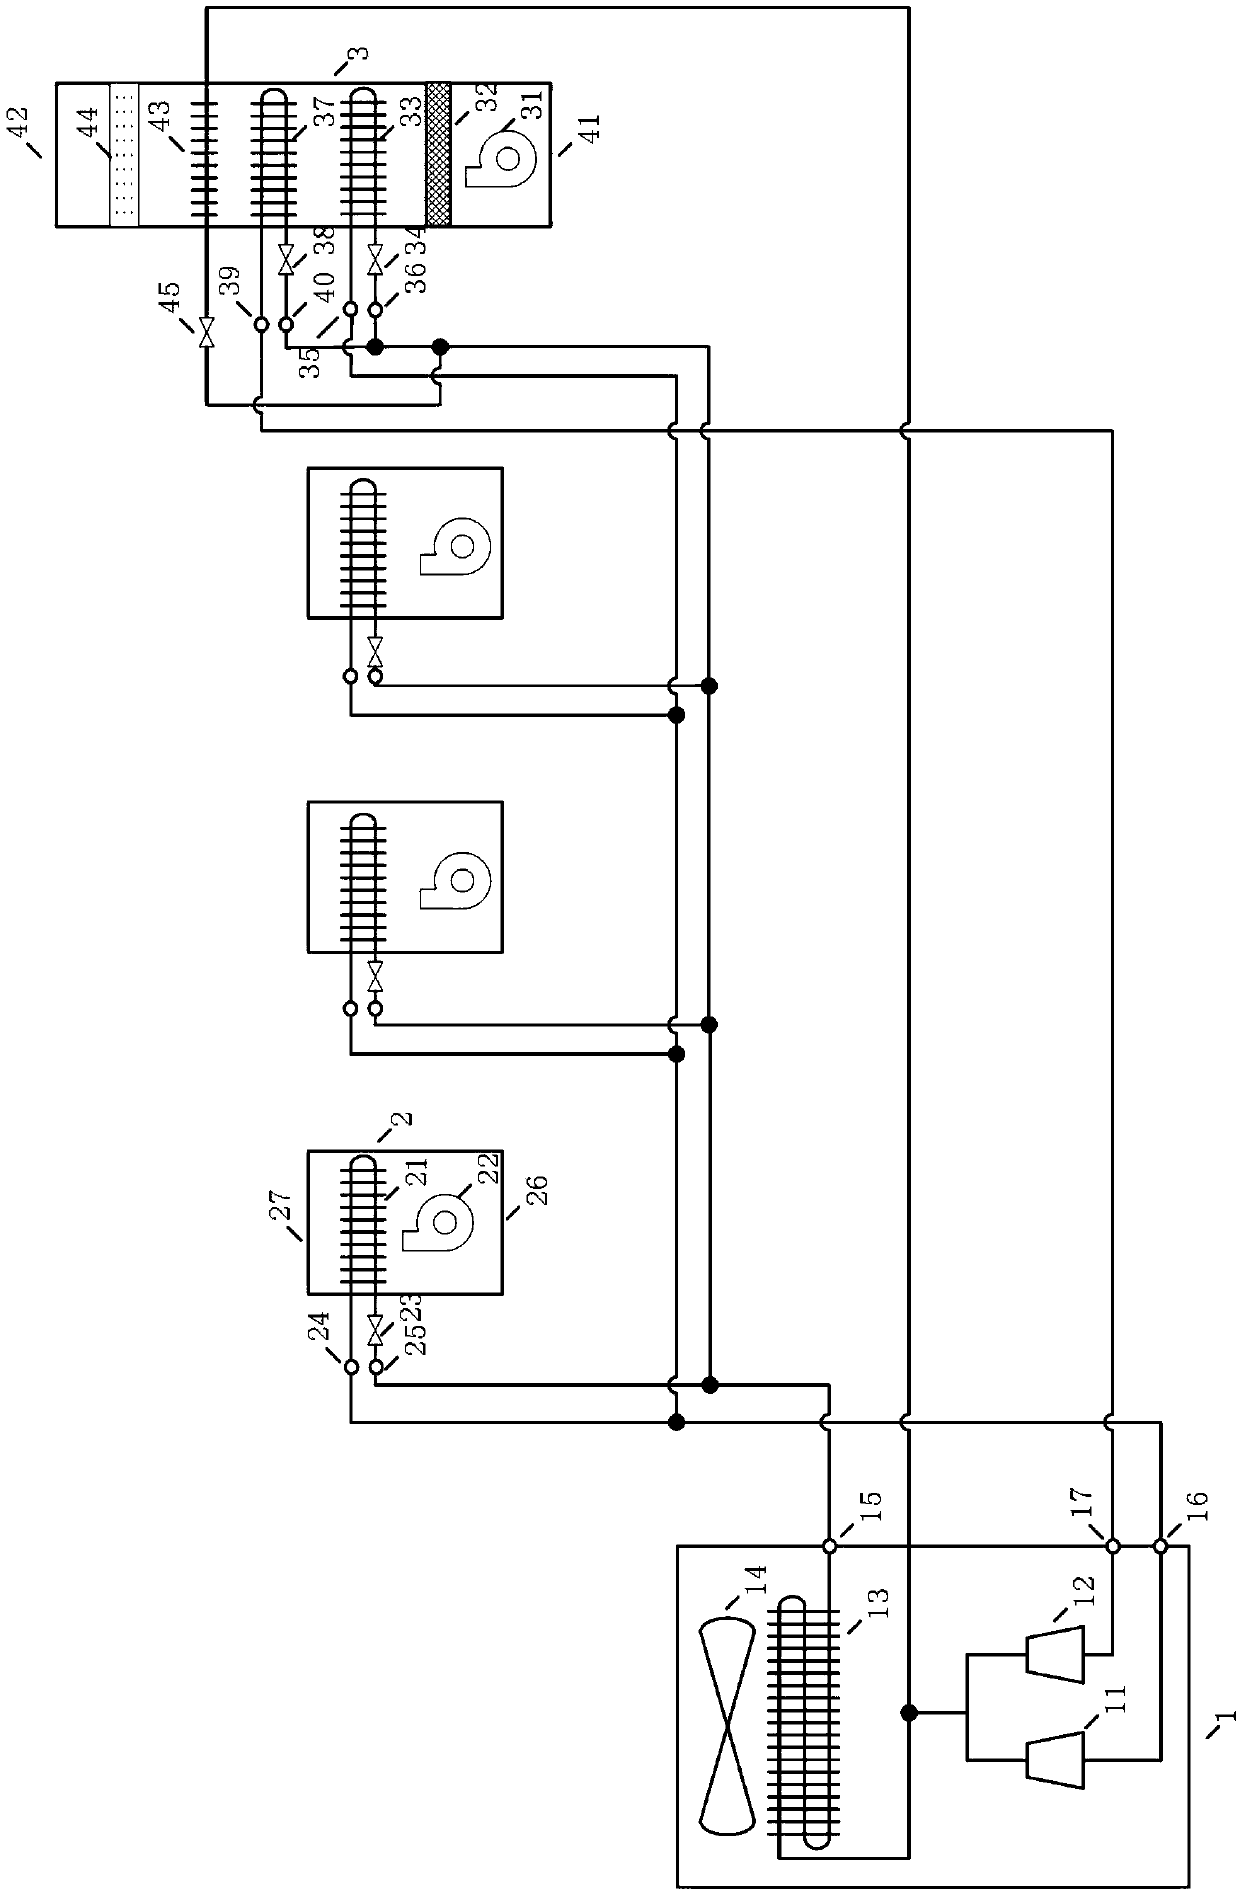 Integrated multi-connected high-temperature air conditioning unit with fresh air handling function